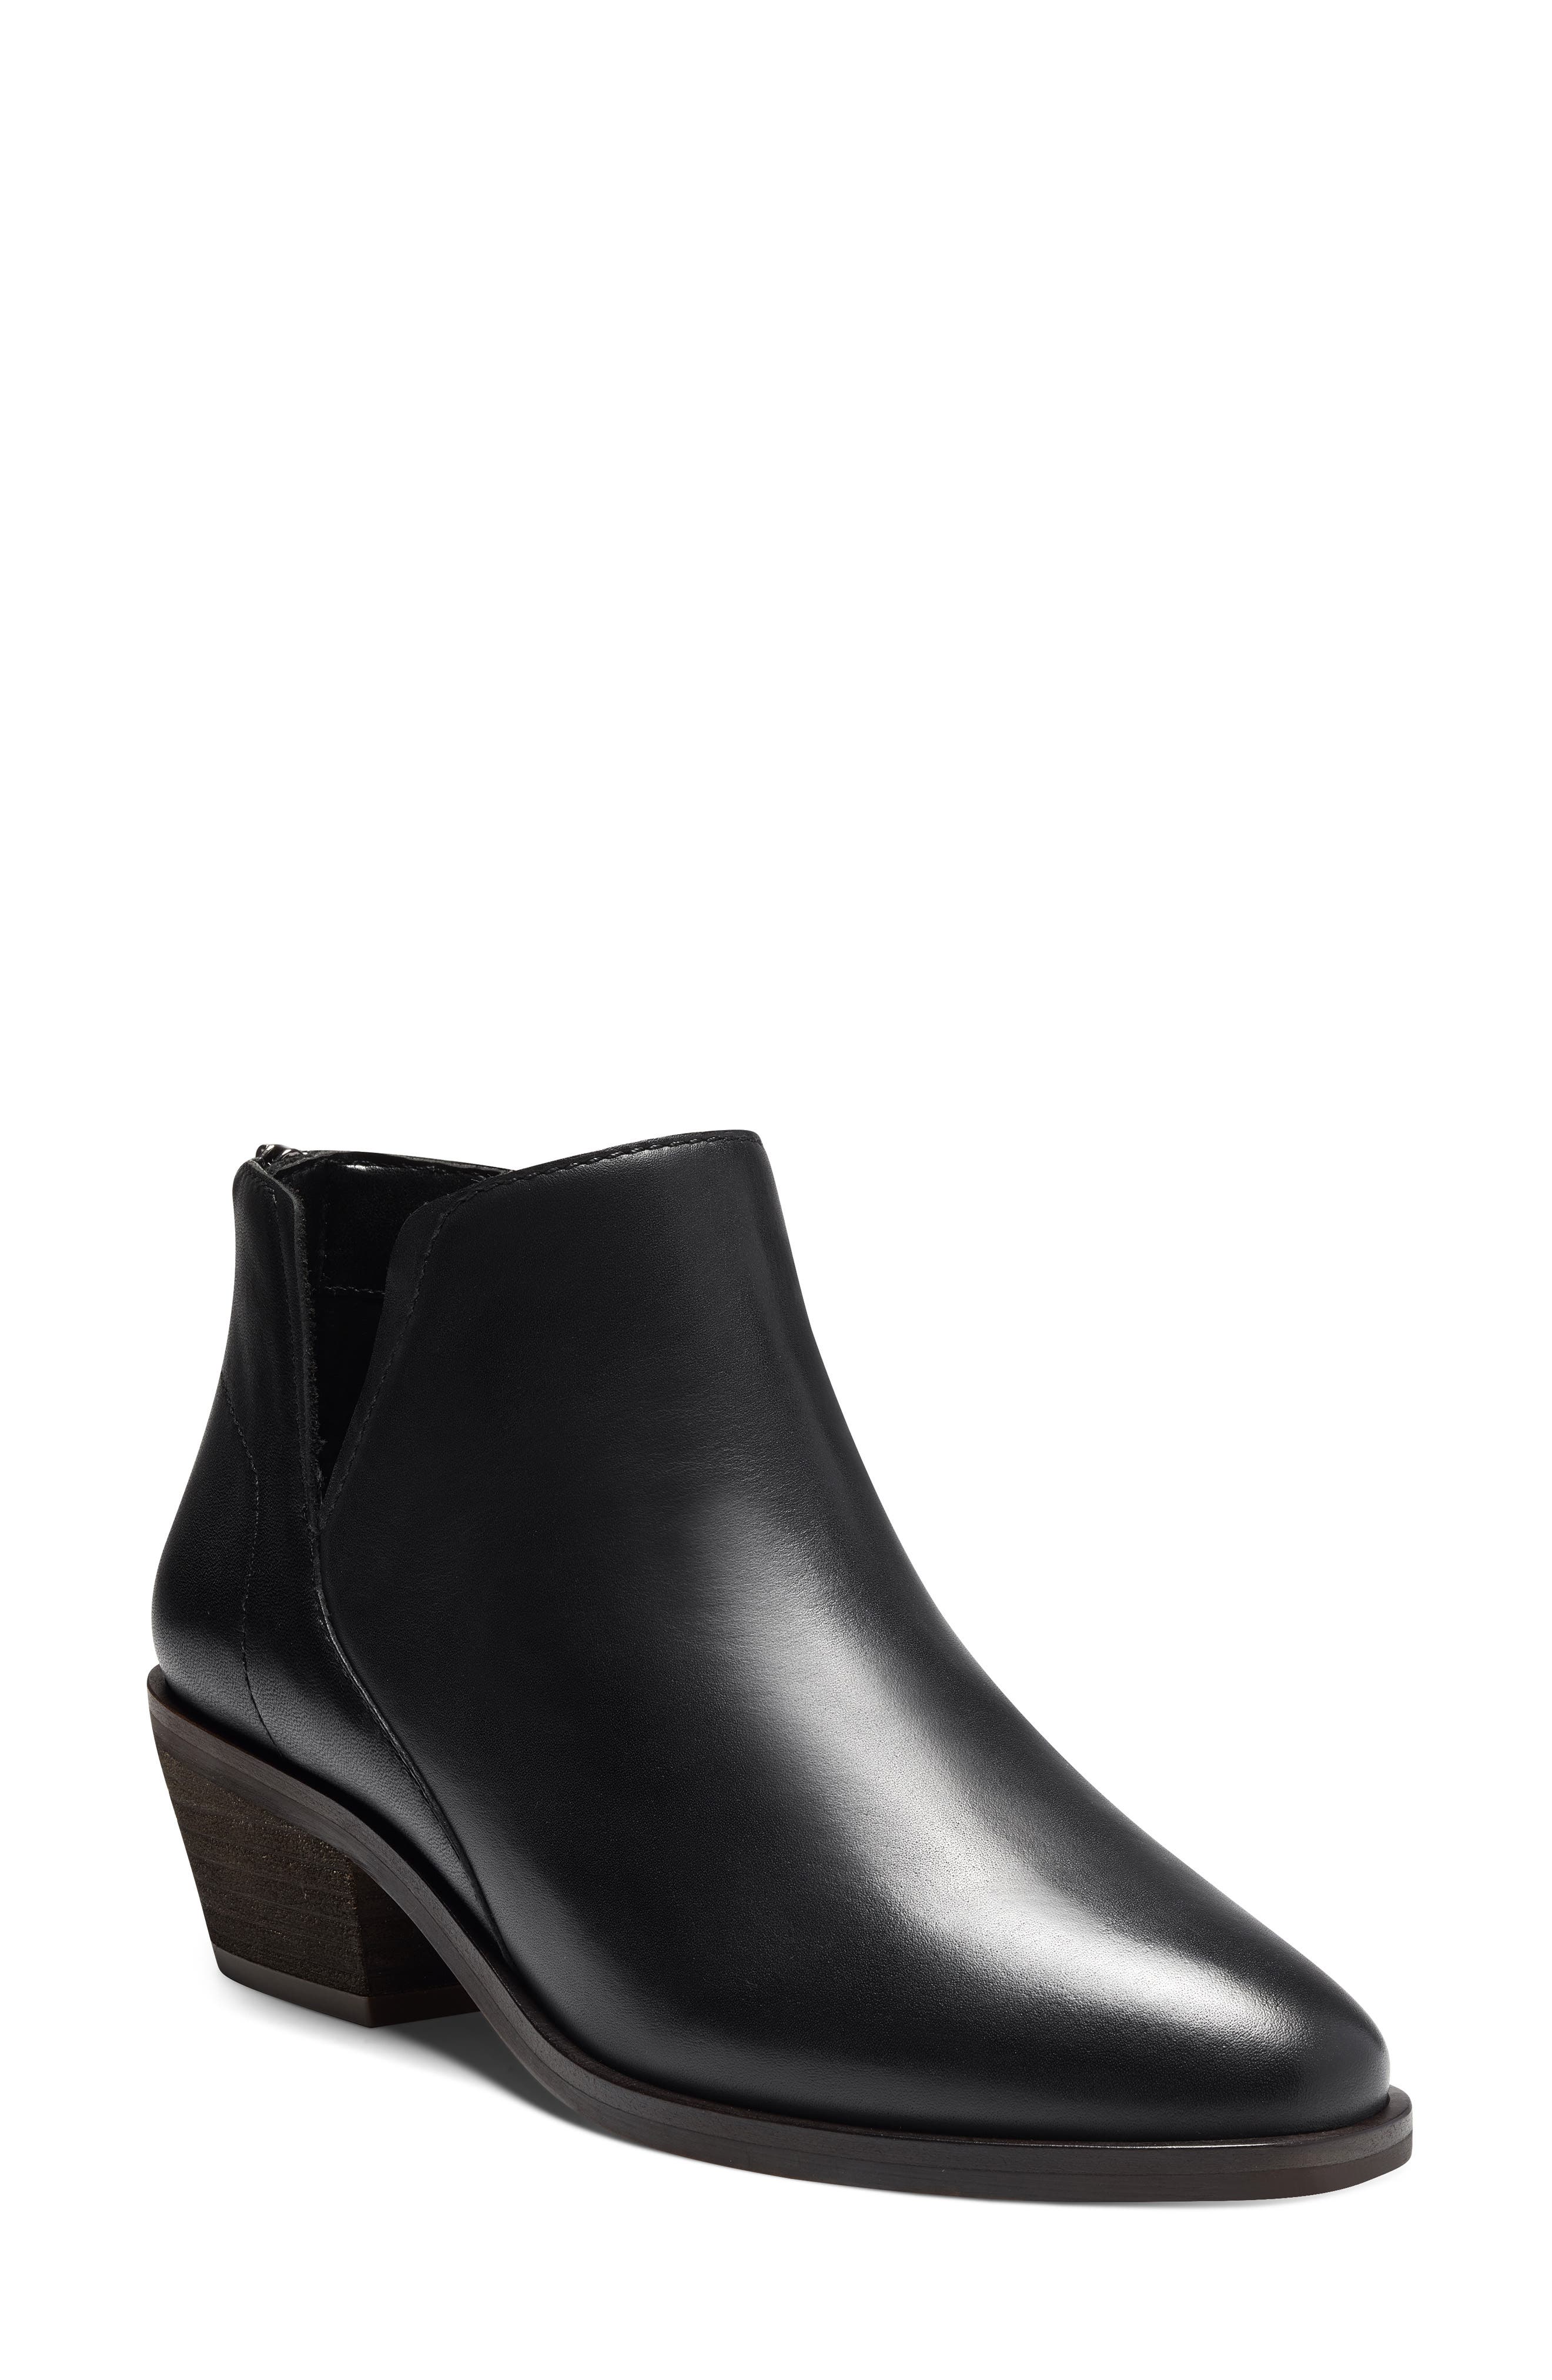 Vince Camuto Abrinna Bootie In Black Leather